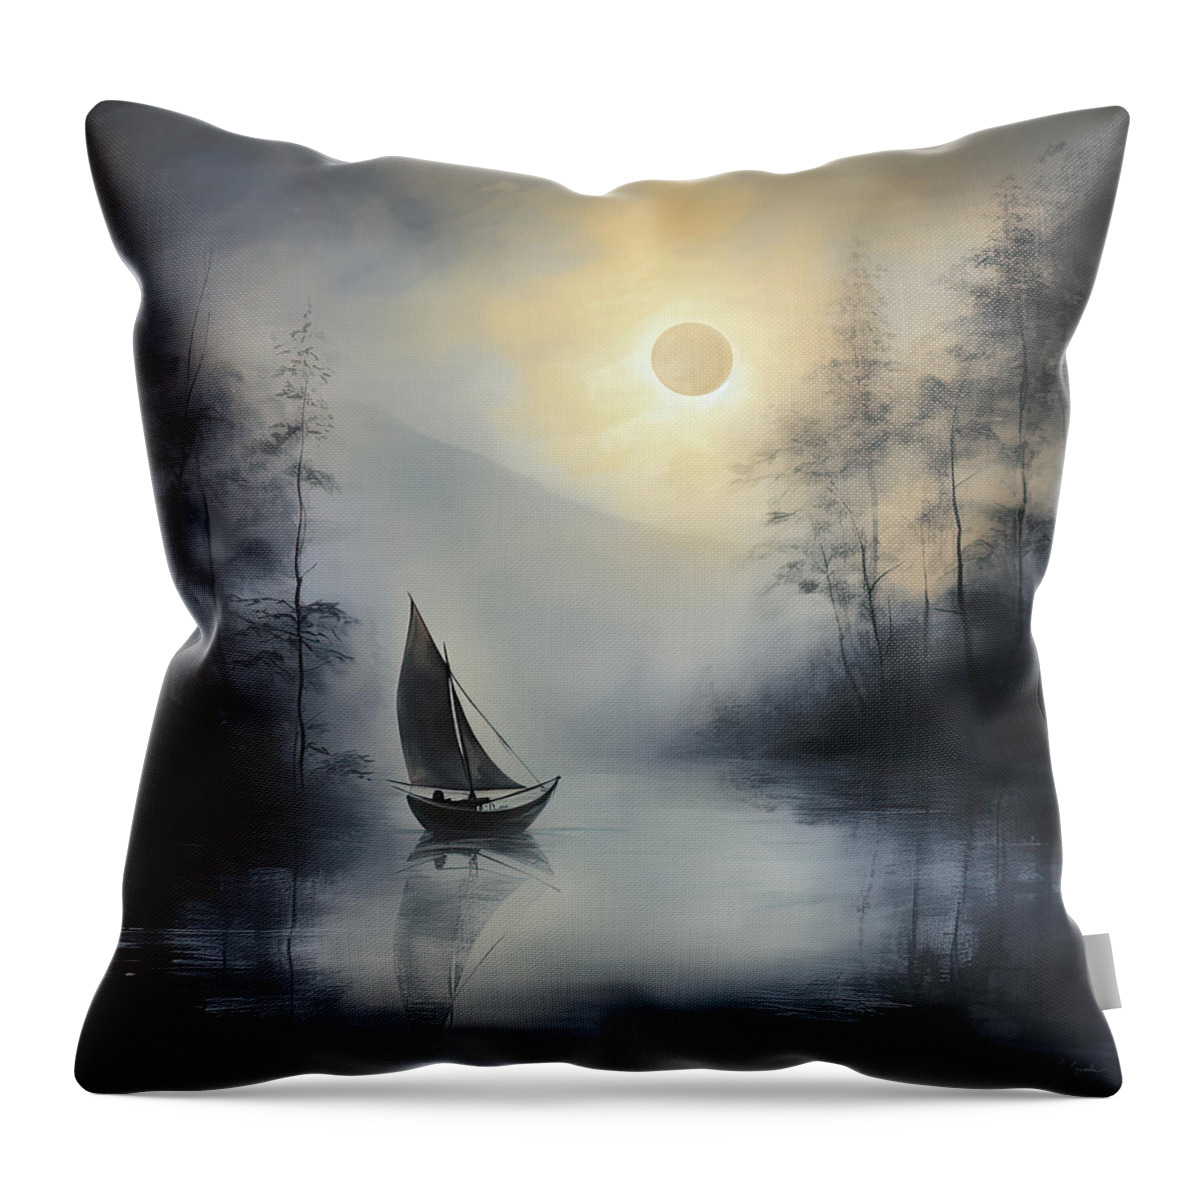 Mystery Art Throw Pillow featuring the painting Moonlit Watcher - Gray Art by Lourry Legarde